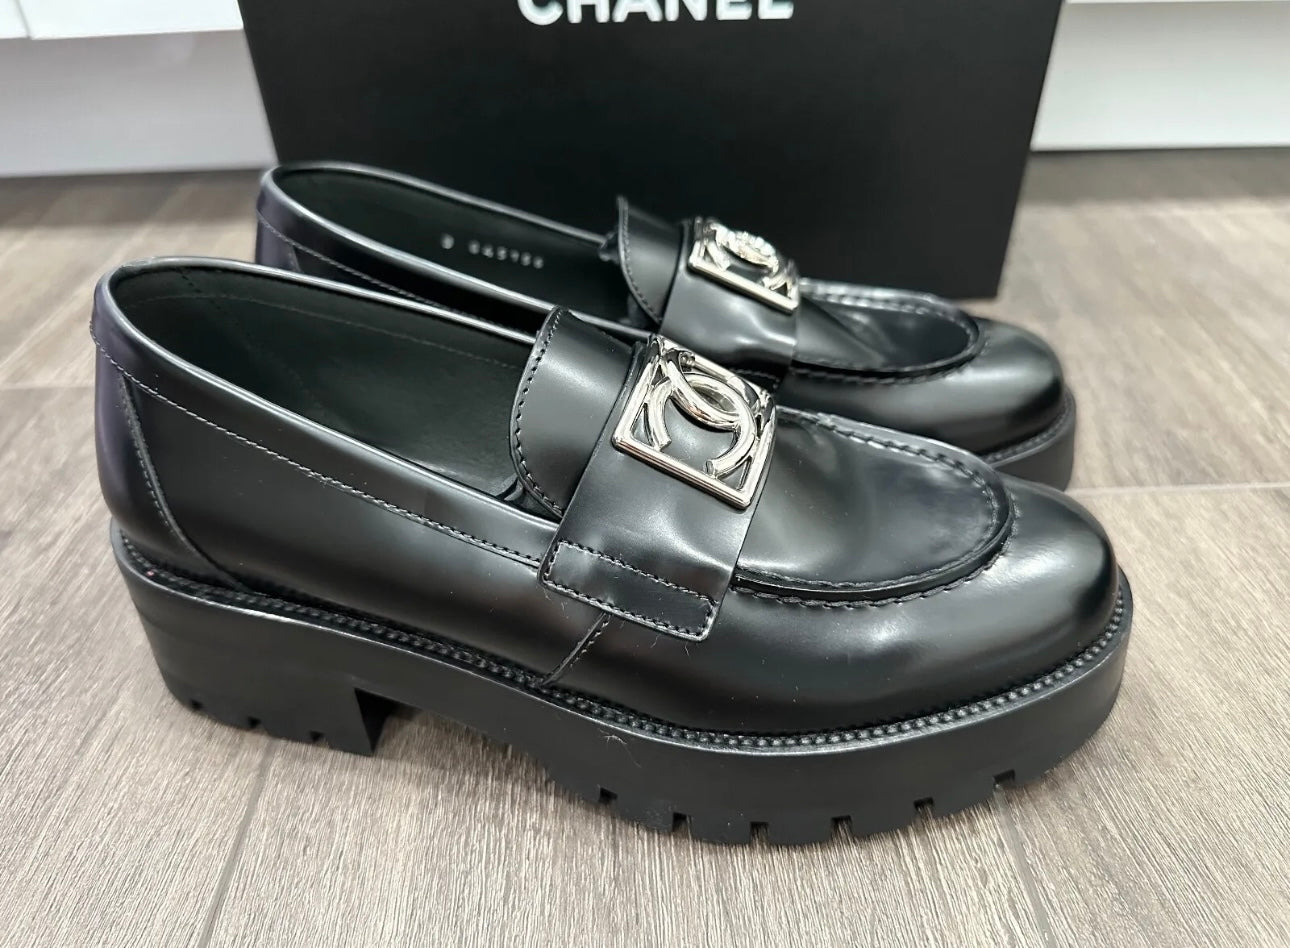 2023 CHANEL BLACK LEATHER METAL CC LOAFERS OXFORD SHOES MOCCASINS